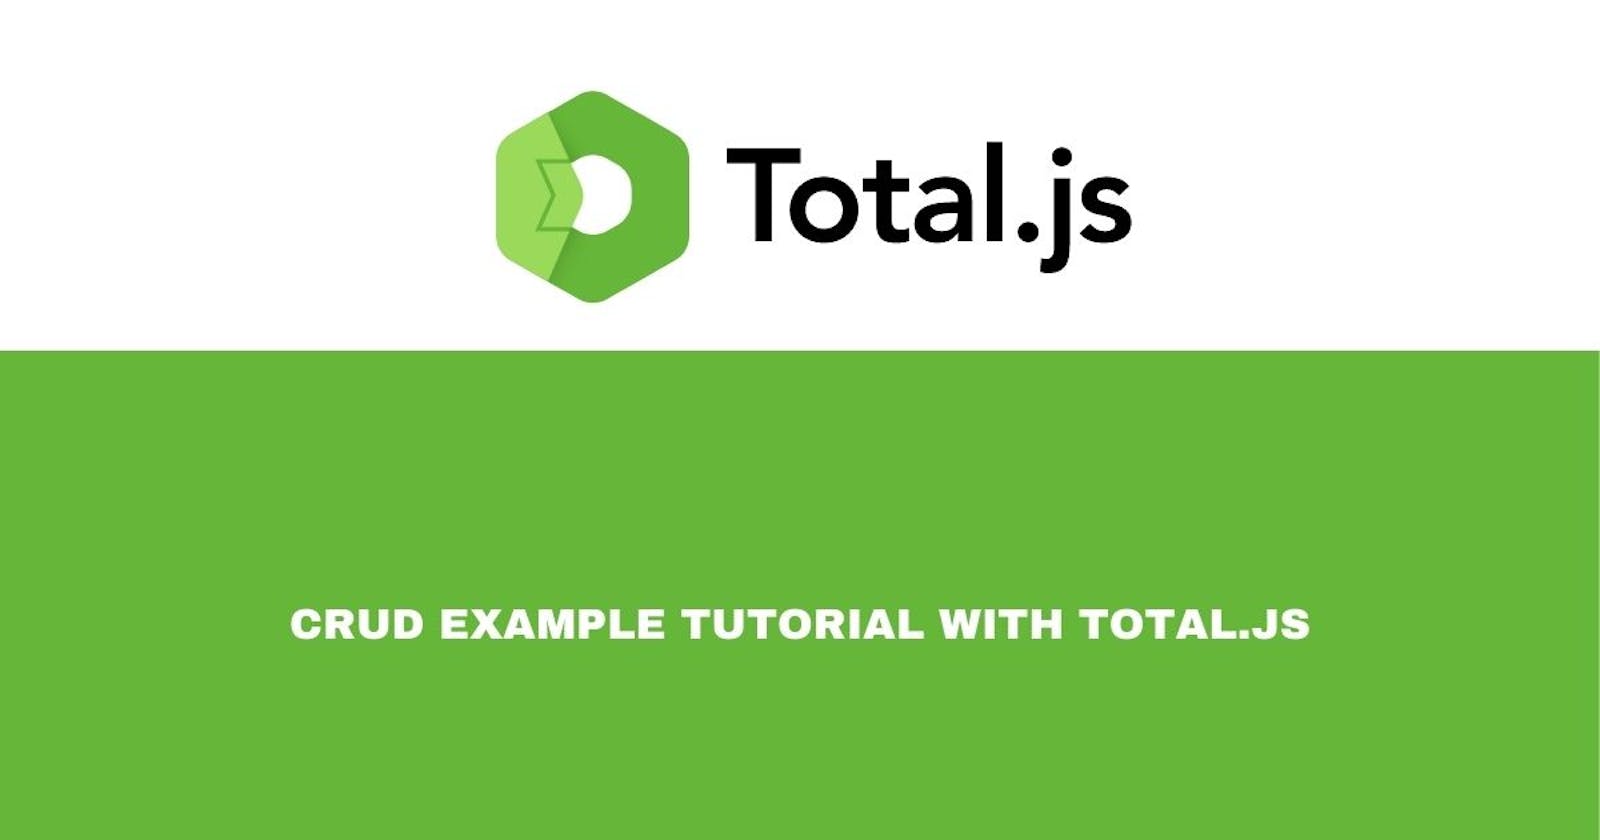 Blog post tutorial with total.js (part 2)